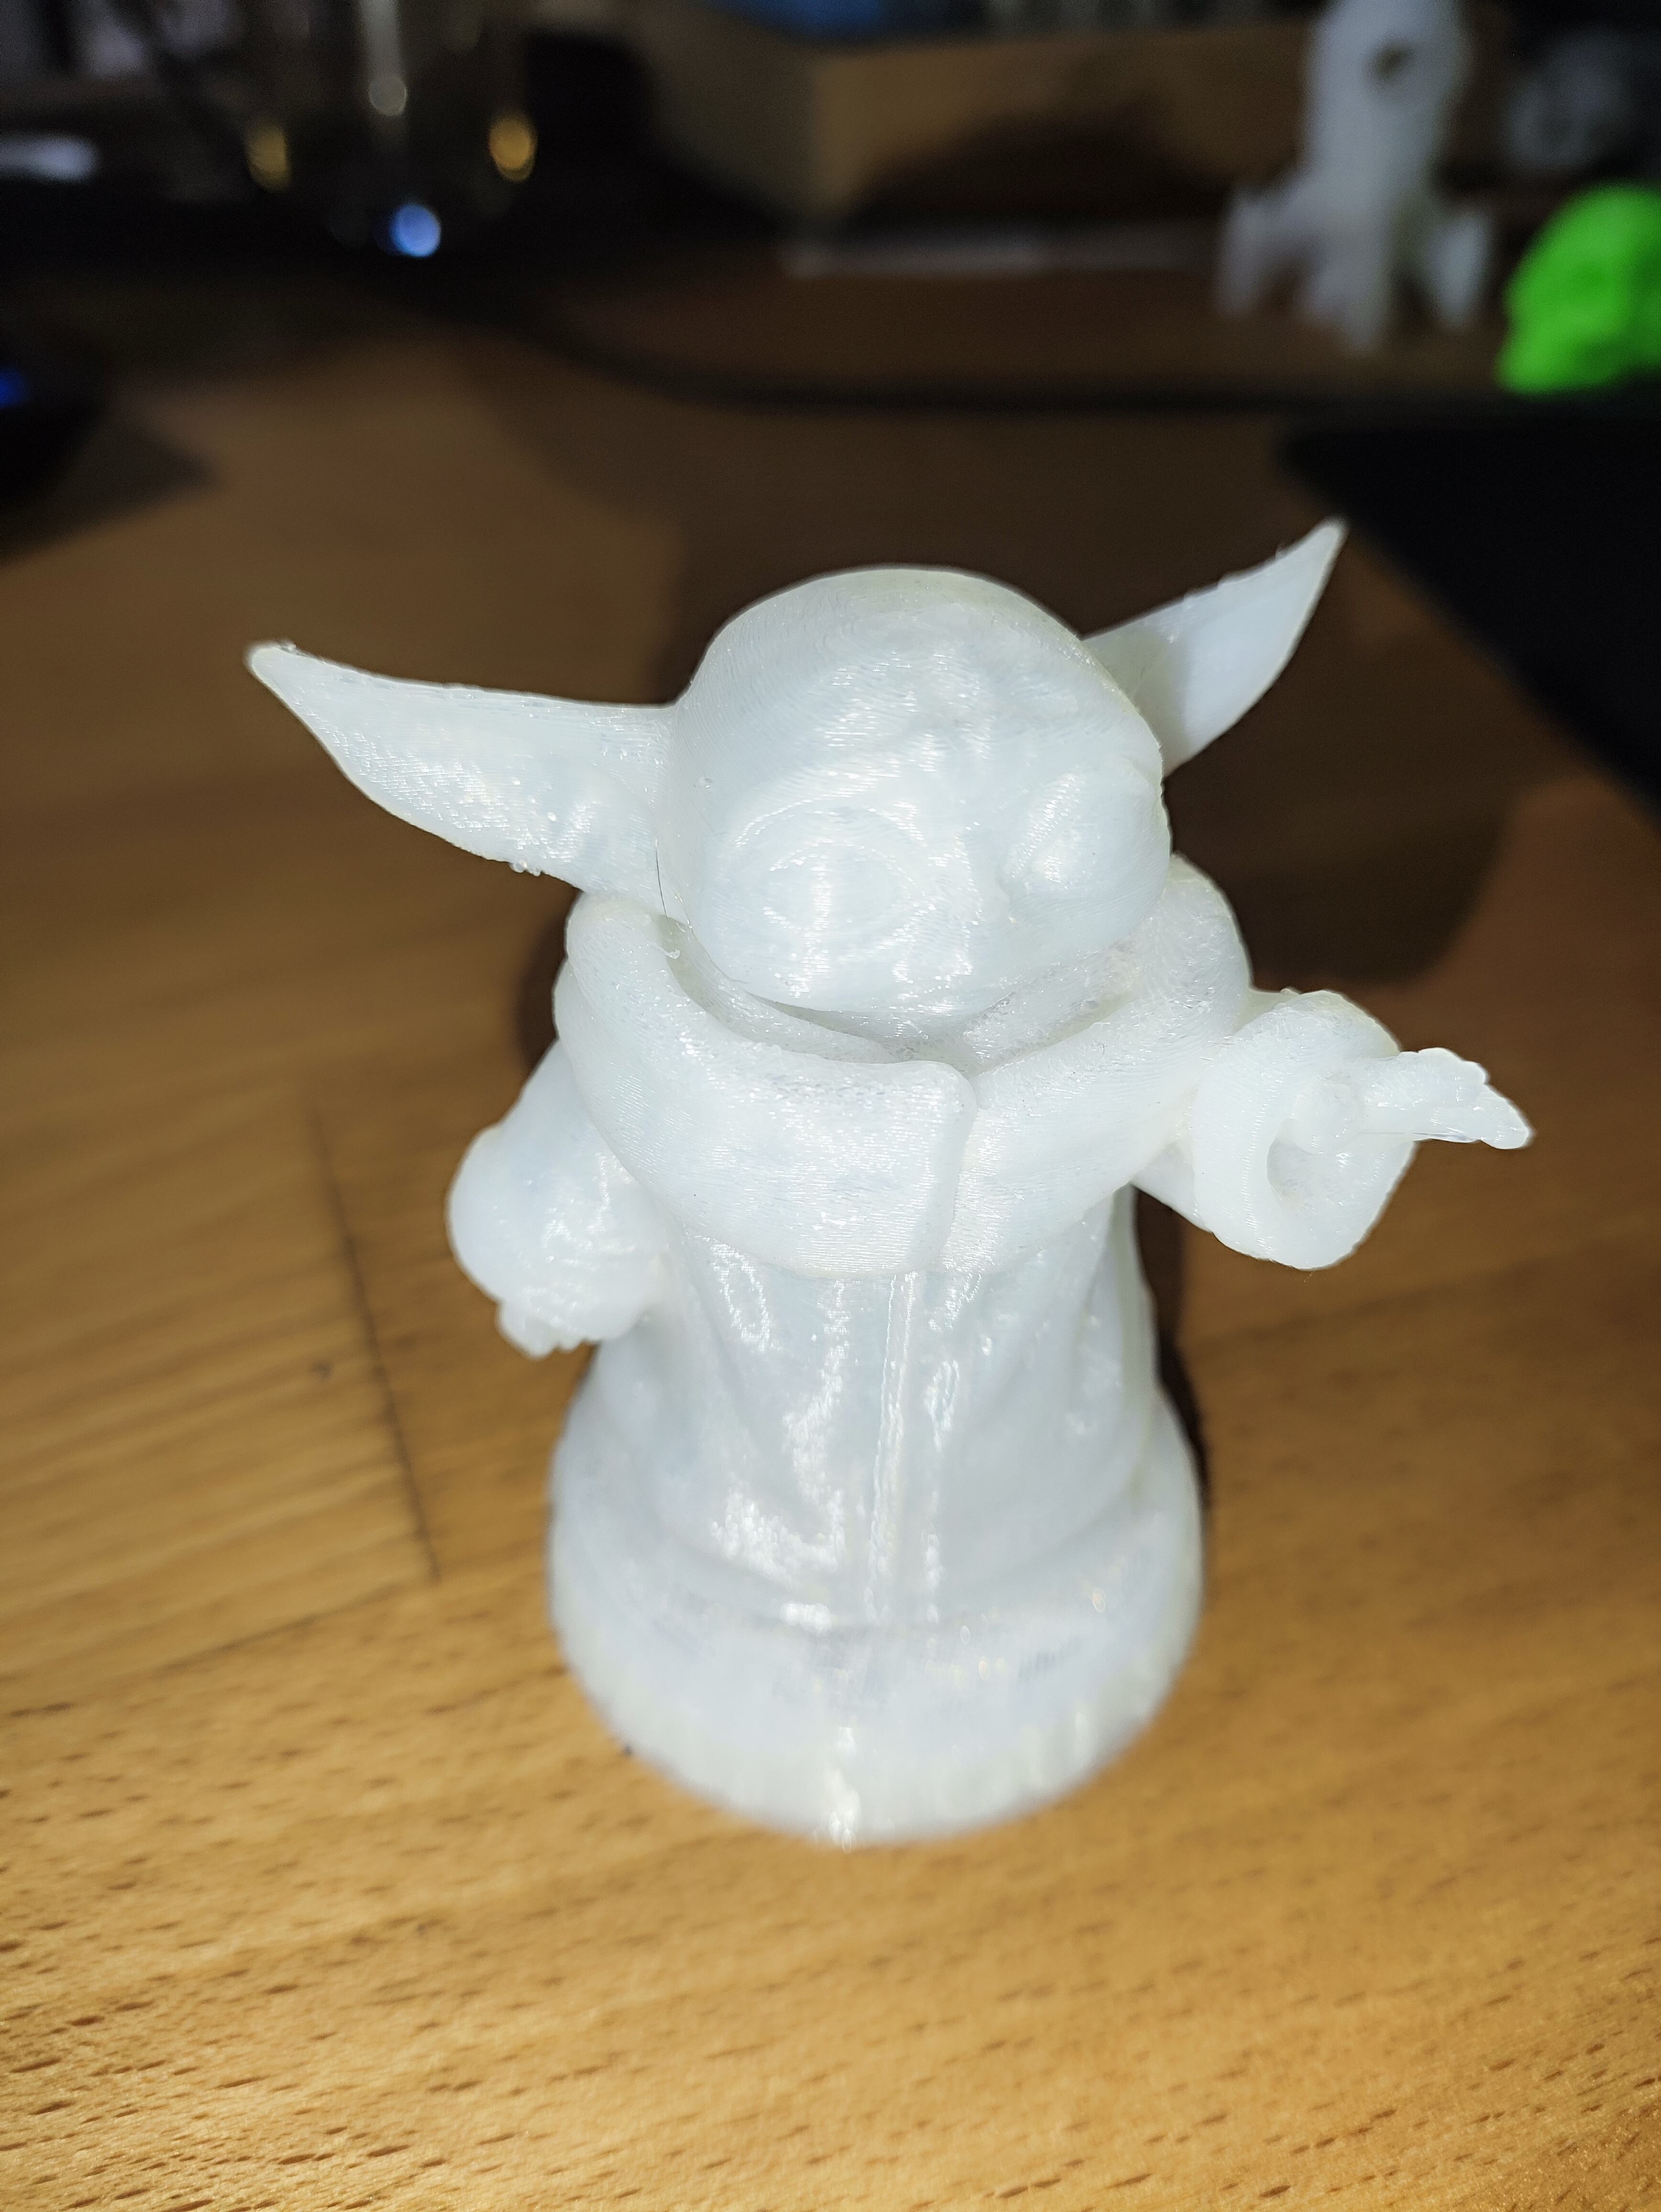 For my Baby Yoda (Grogu) 3D print, inspired by the beloved character from Star  Wars, I utilized the Creality K1 printer and PLA material. The K1's  precision and fine detailing capabilities were